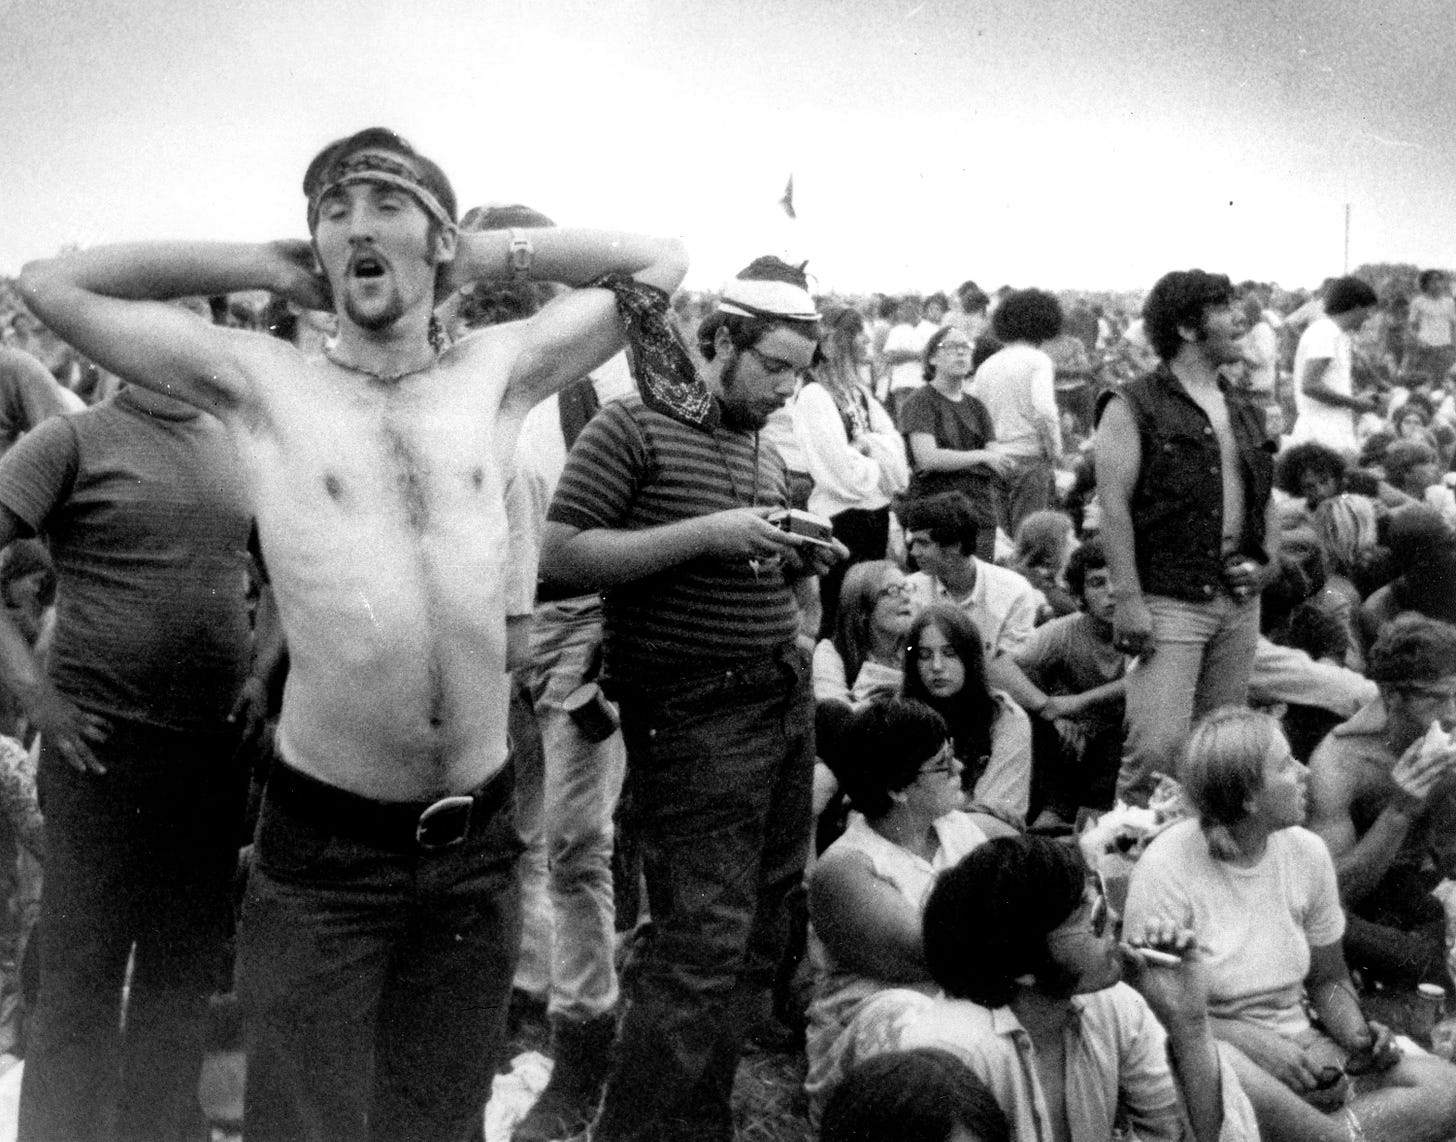 Music fans relax during a break in the entertainment at the Woodstock Music and Arts Fair on Aug. 16, 1969.